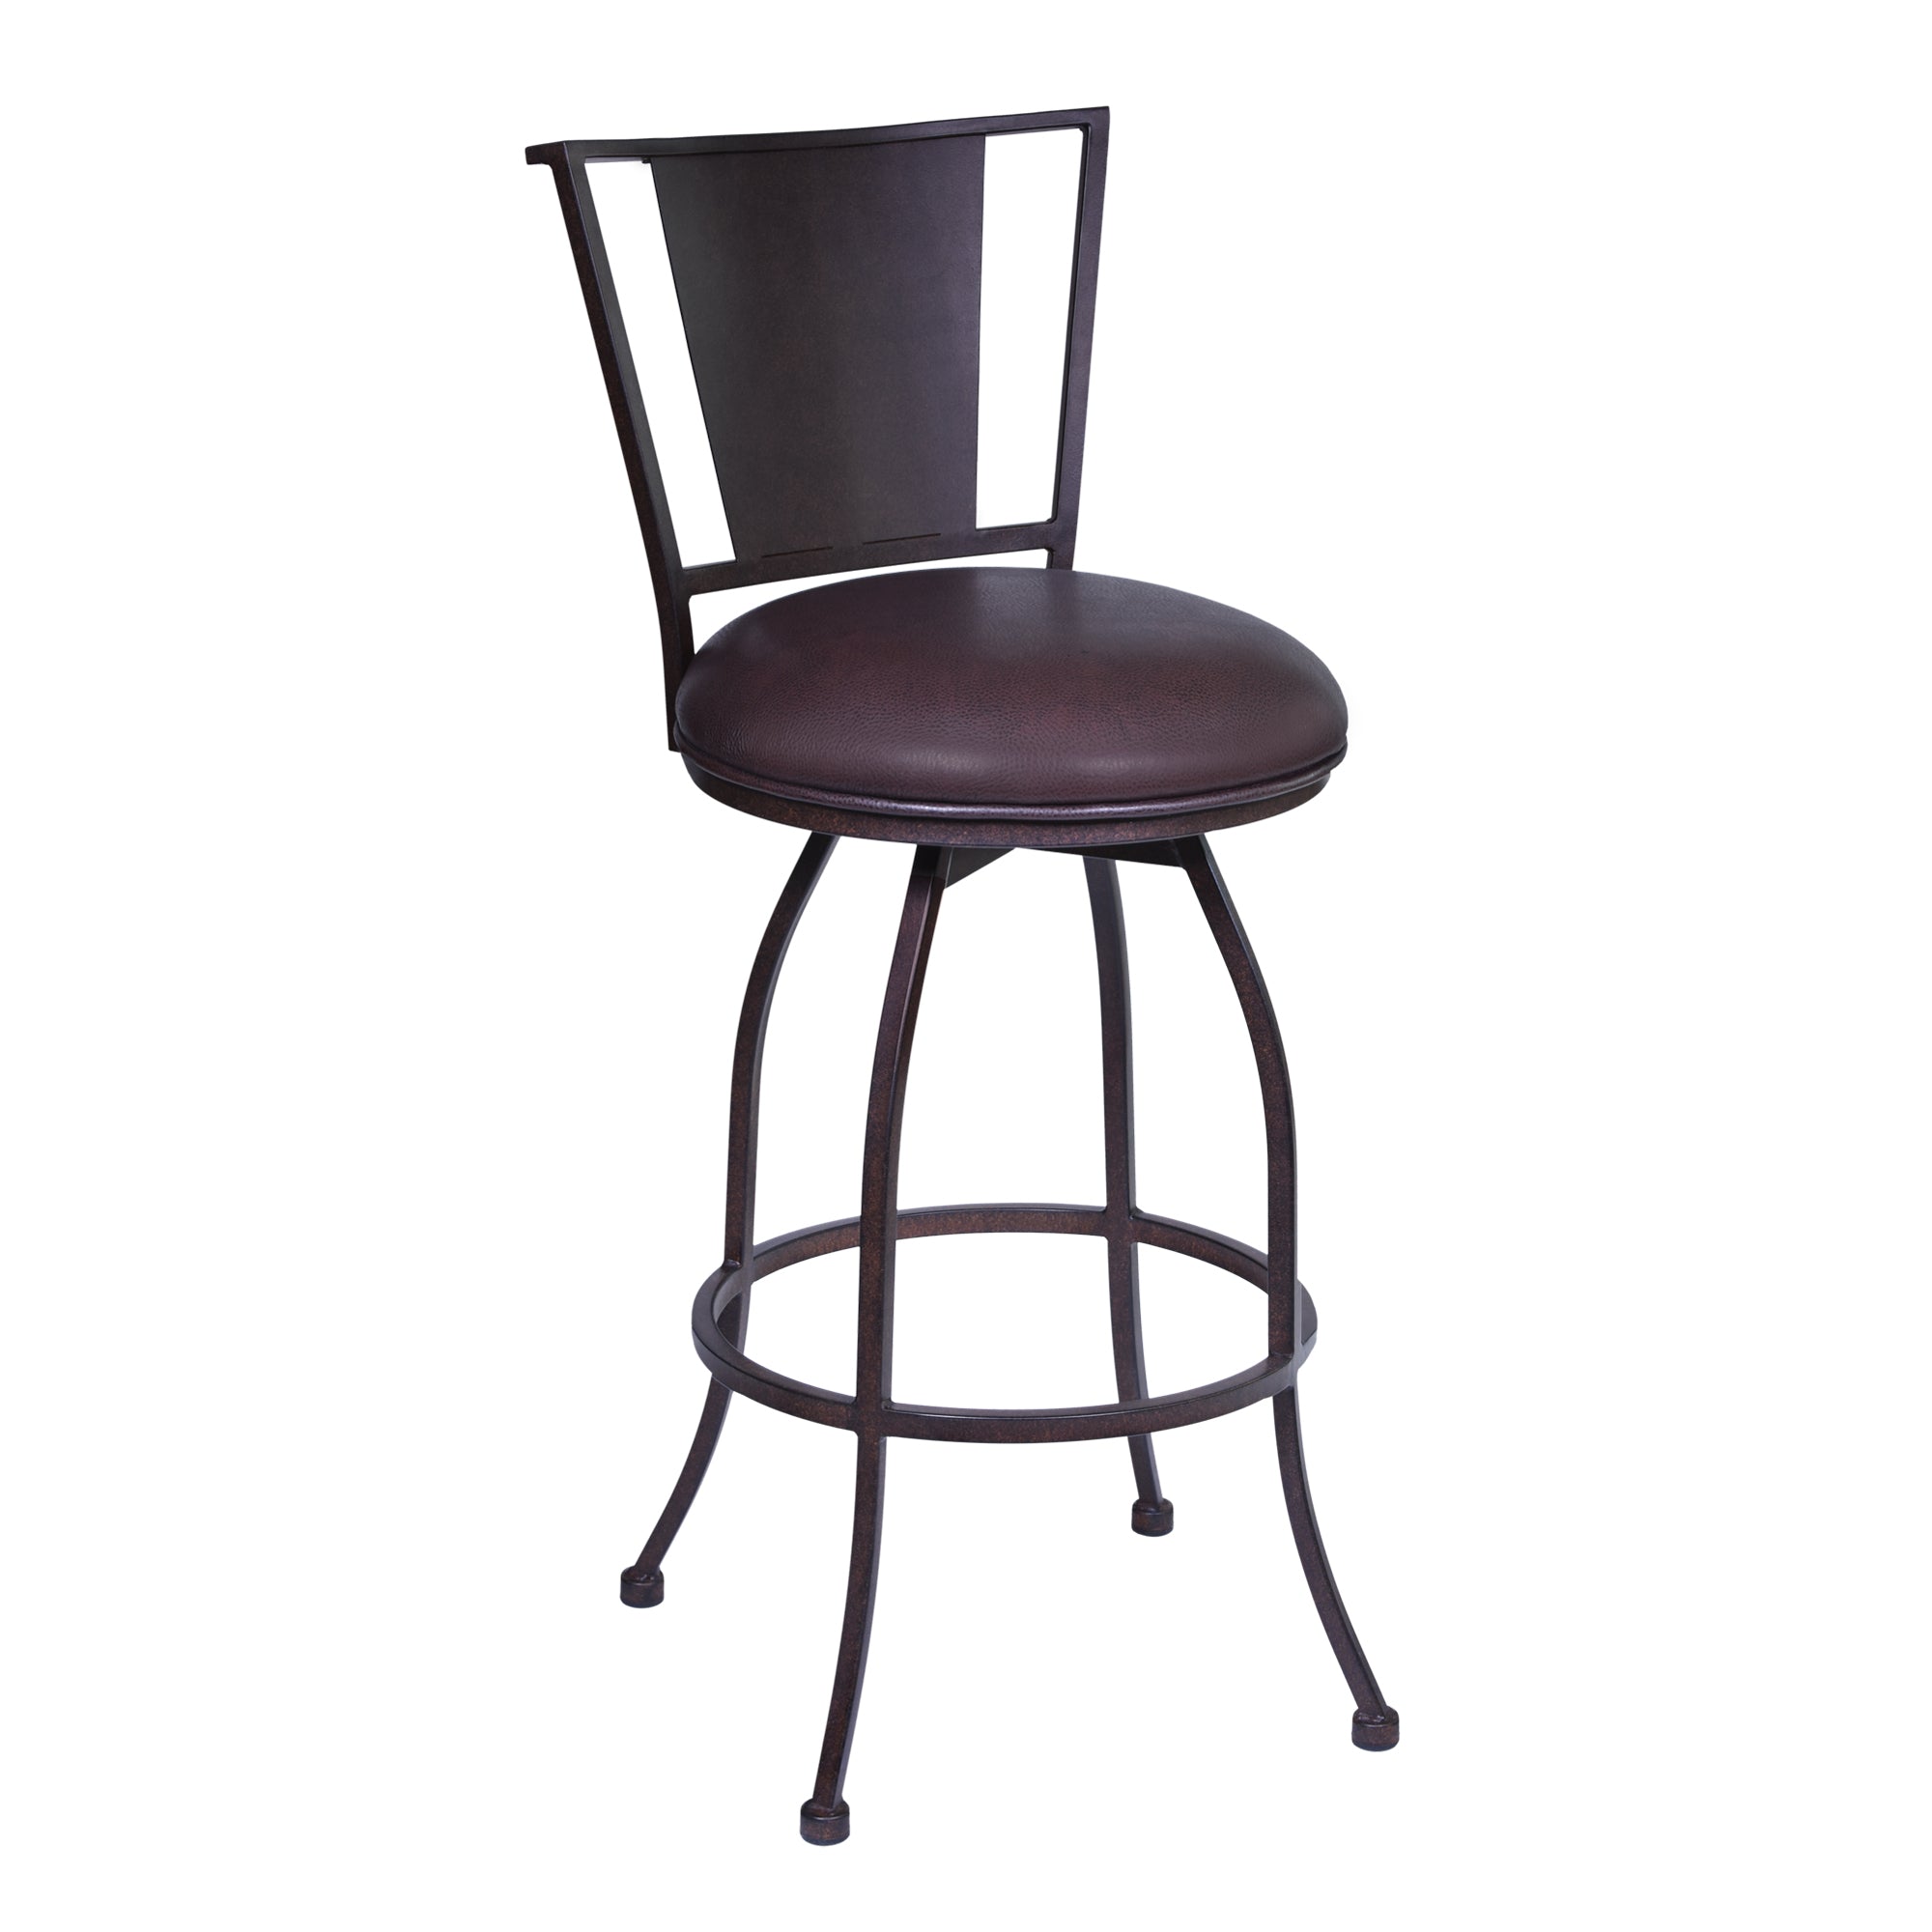 Armen Living Lcdy26babr Dynasty 26" Counter Height Barstool In Auburn Bay Finish With Brown Faux Leather